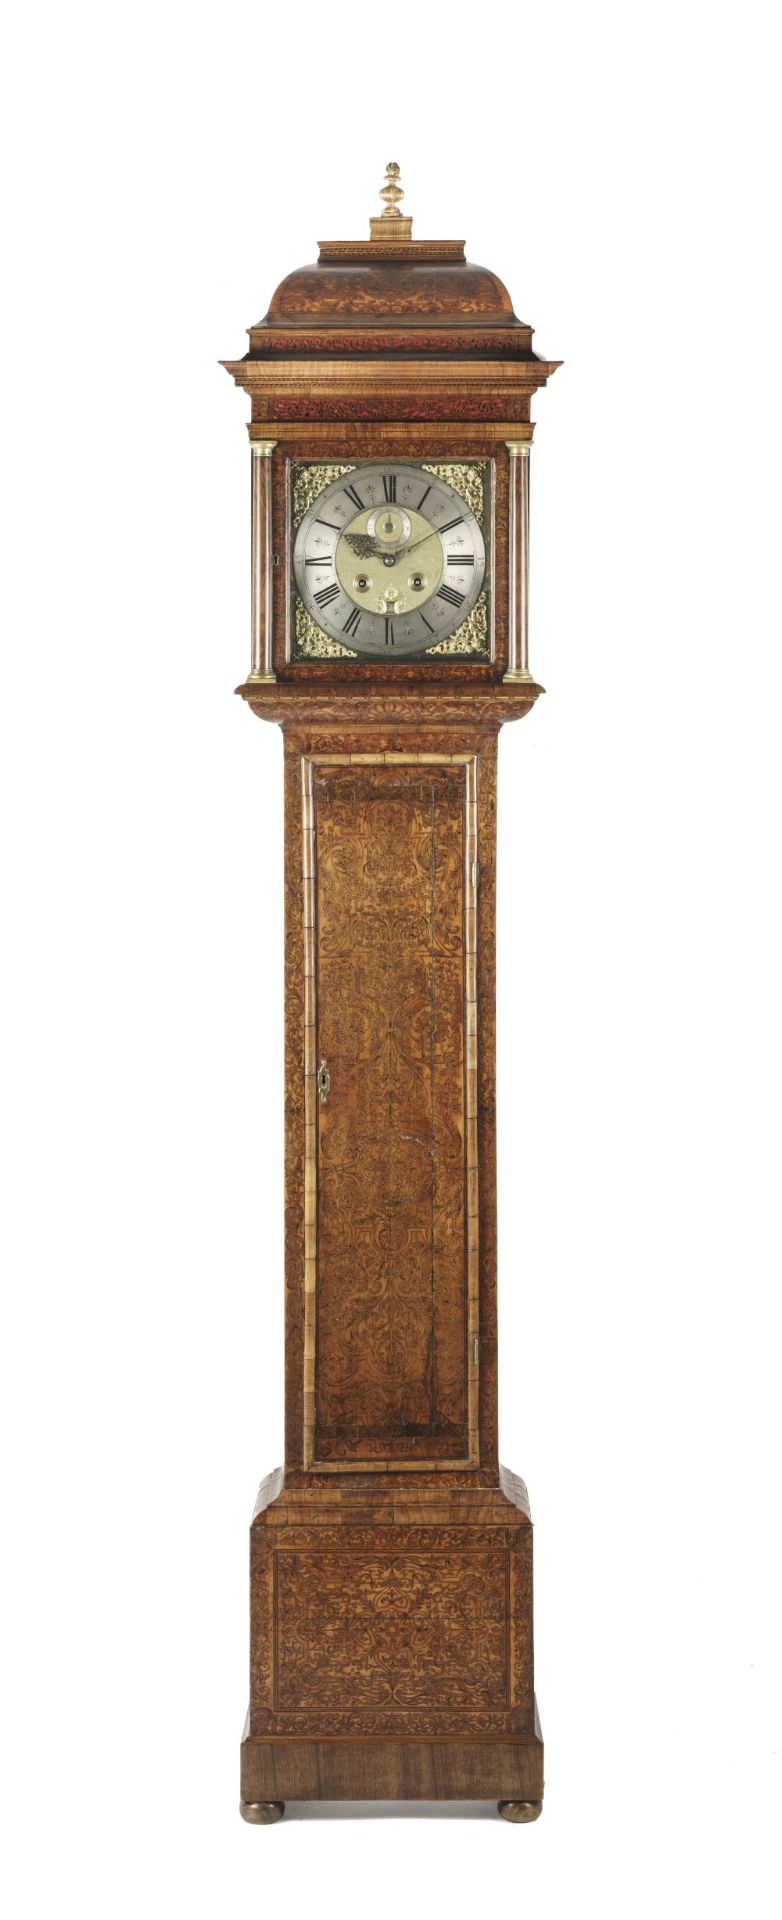 A MONTH-GOING WALNUT AND SEAWEED MARQUETRY LONGCASE CLOCK Jonathan Lowndes, London, circa 1710